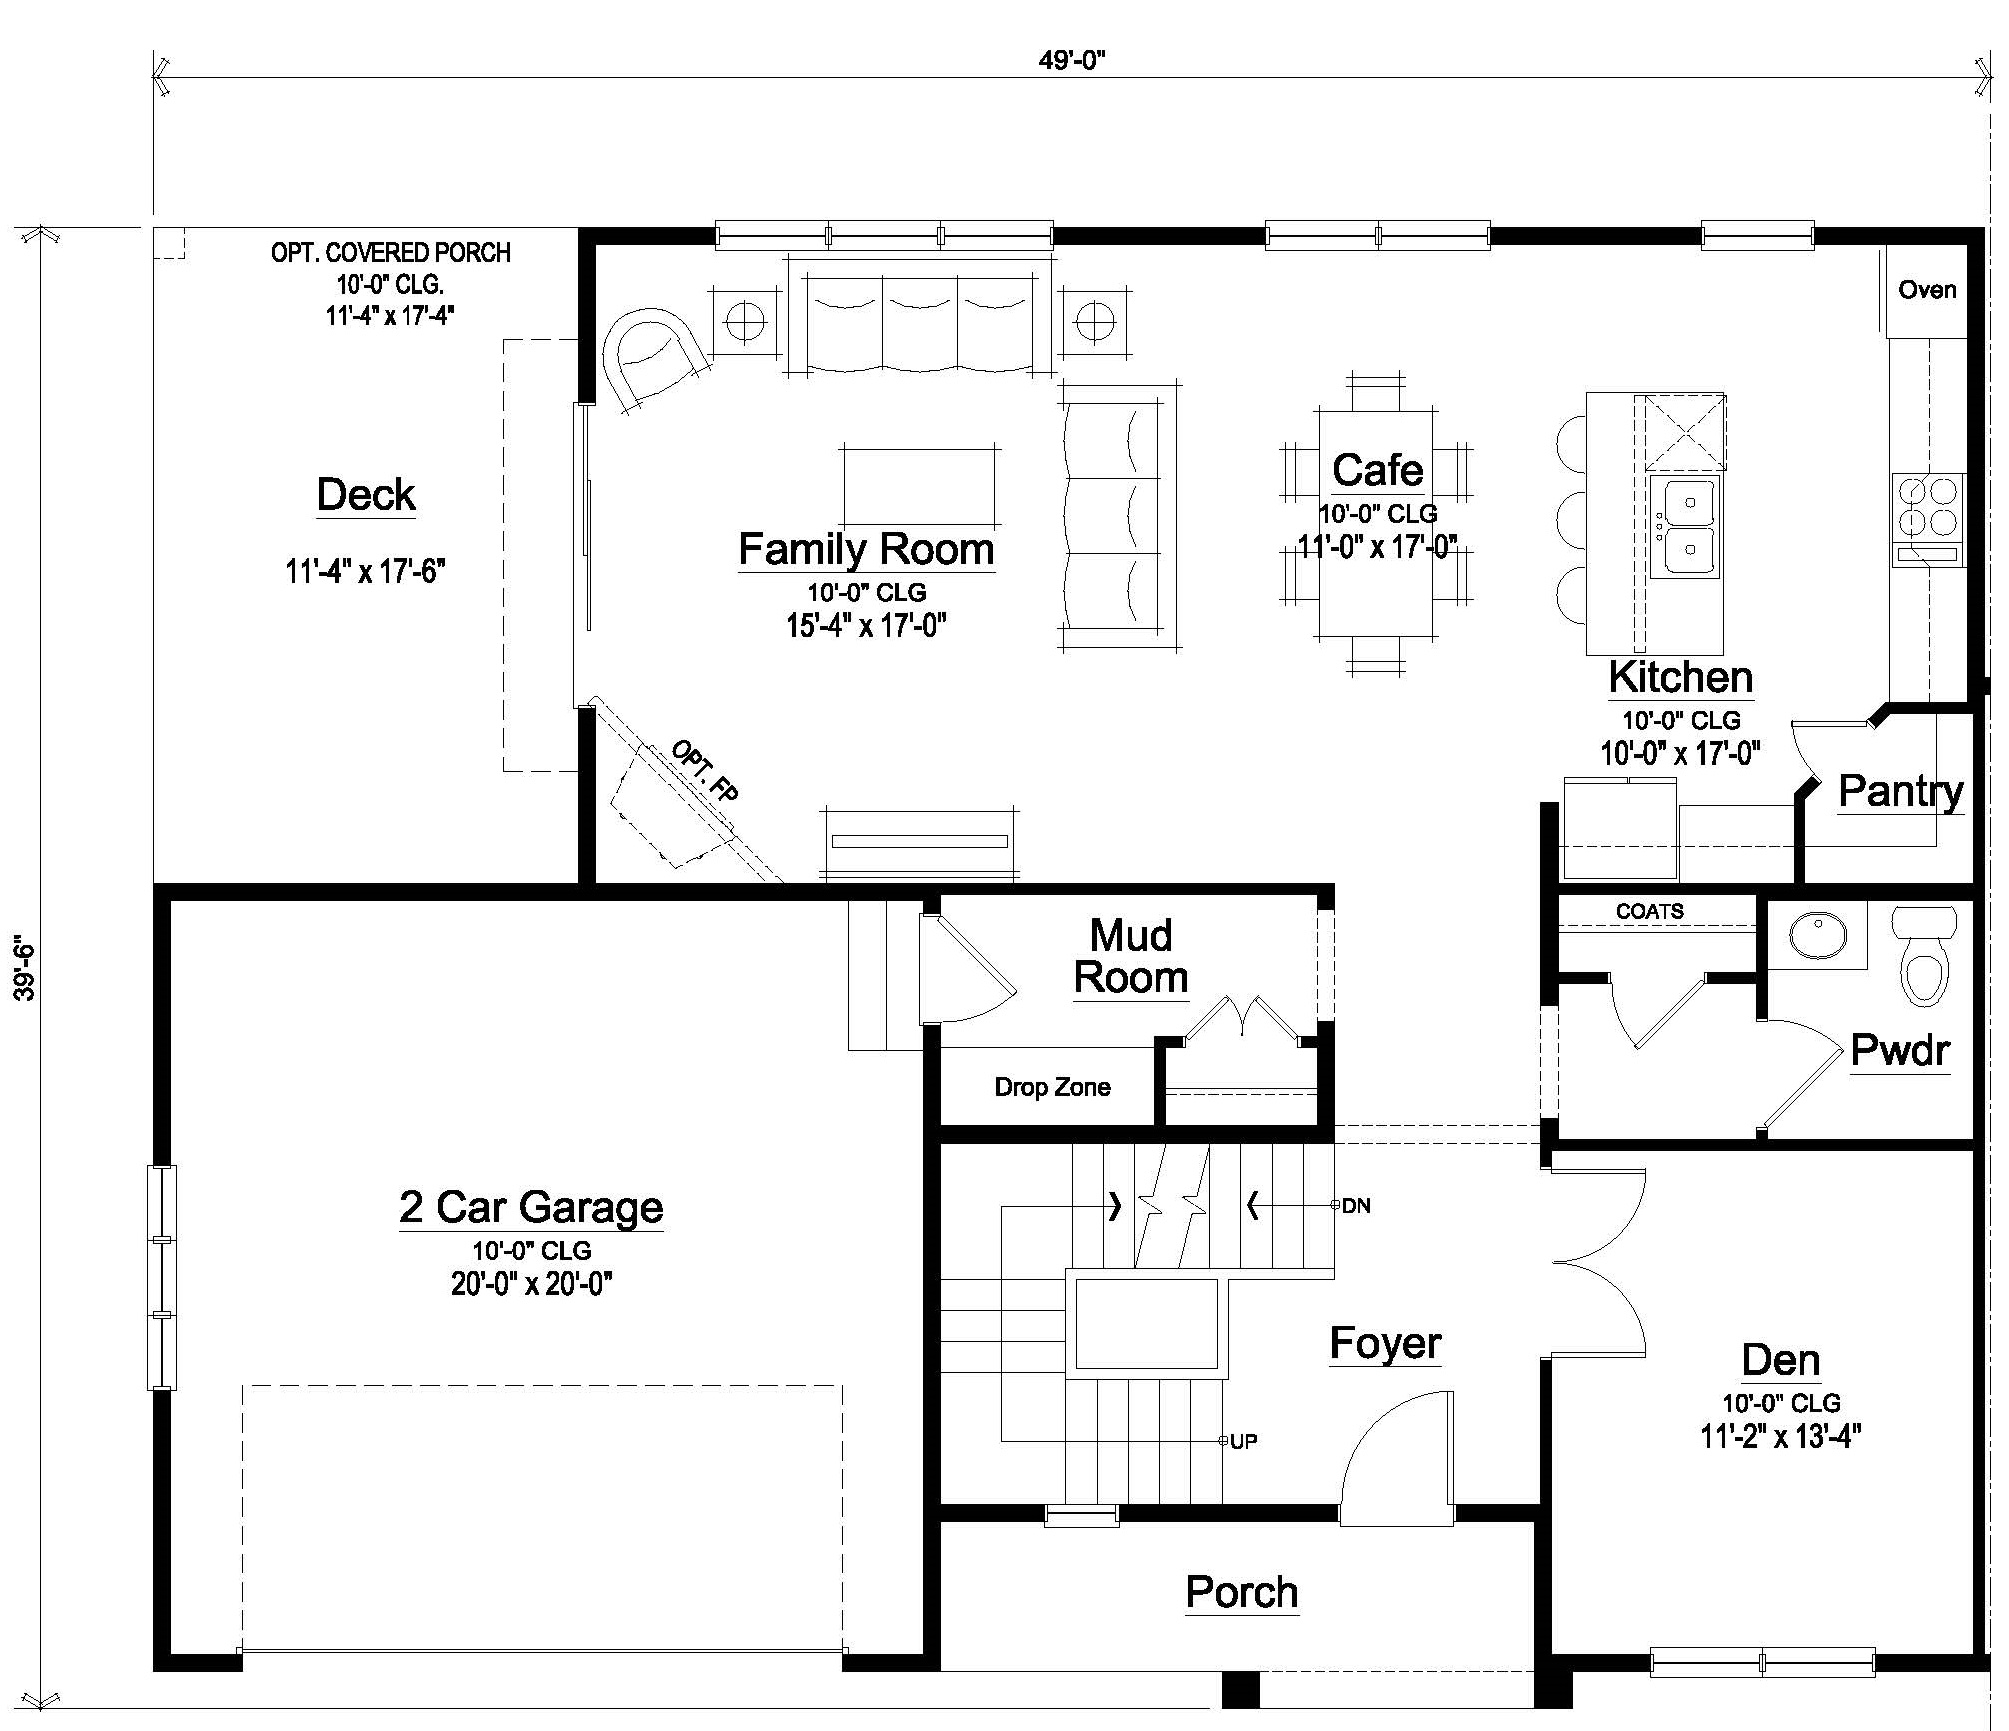 Architectural floor plan of a residential house, including a family room, kitchen, den, garage, and multiple bathrooms, labeled with dimensions and layout details.